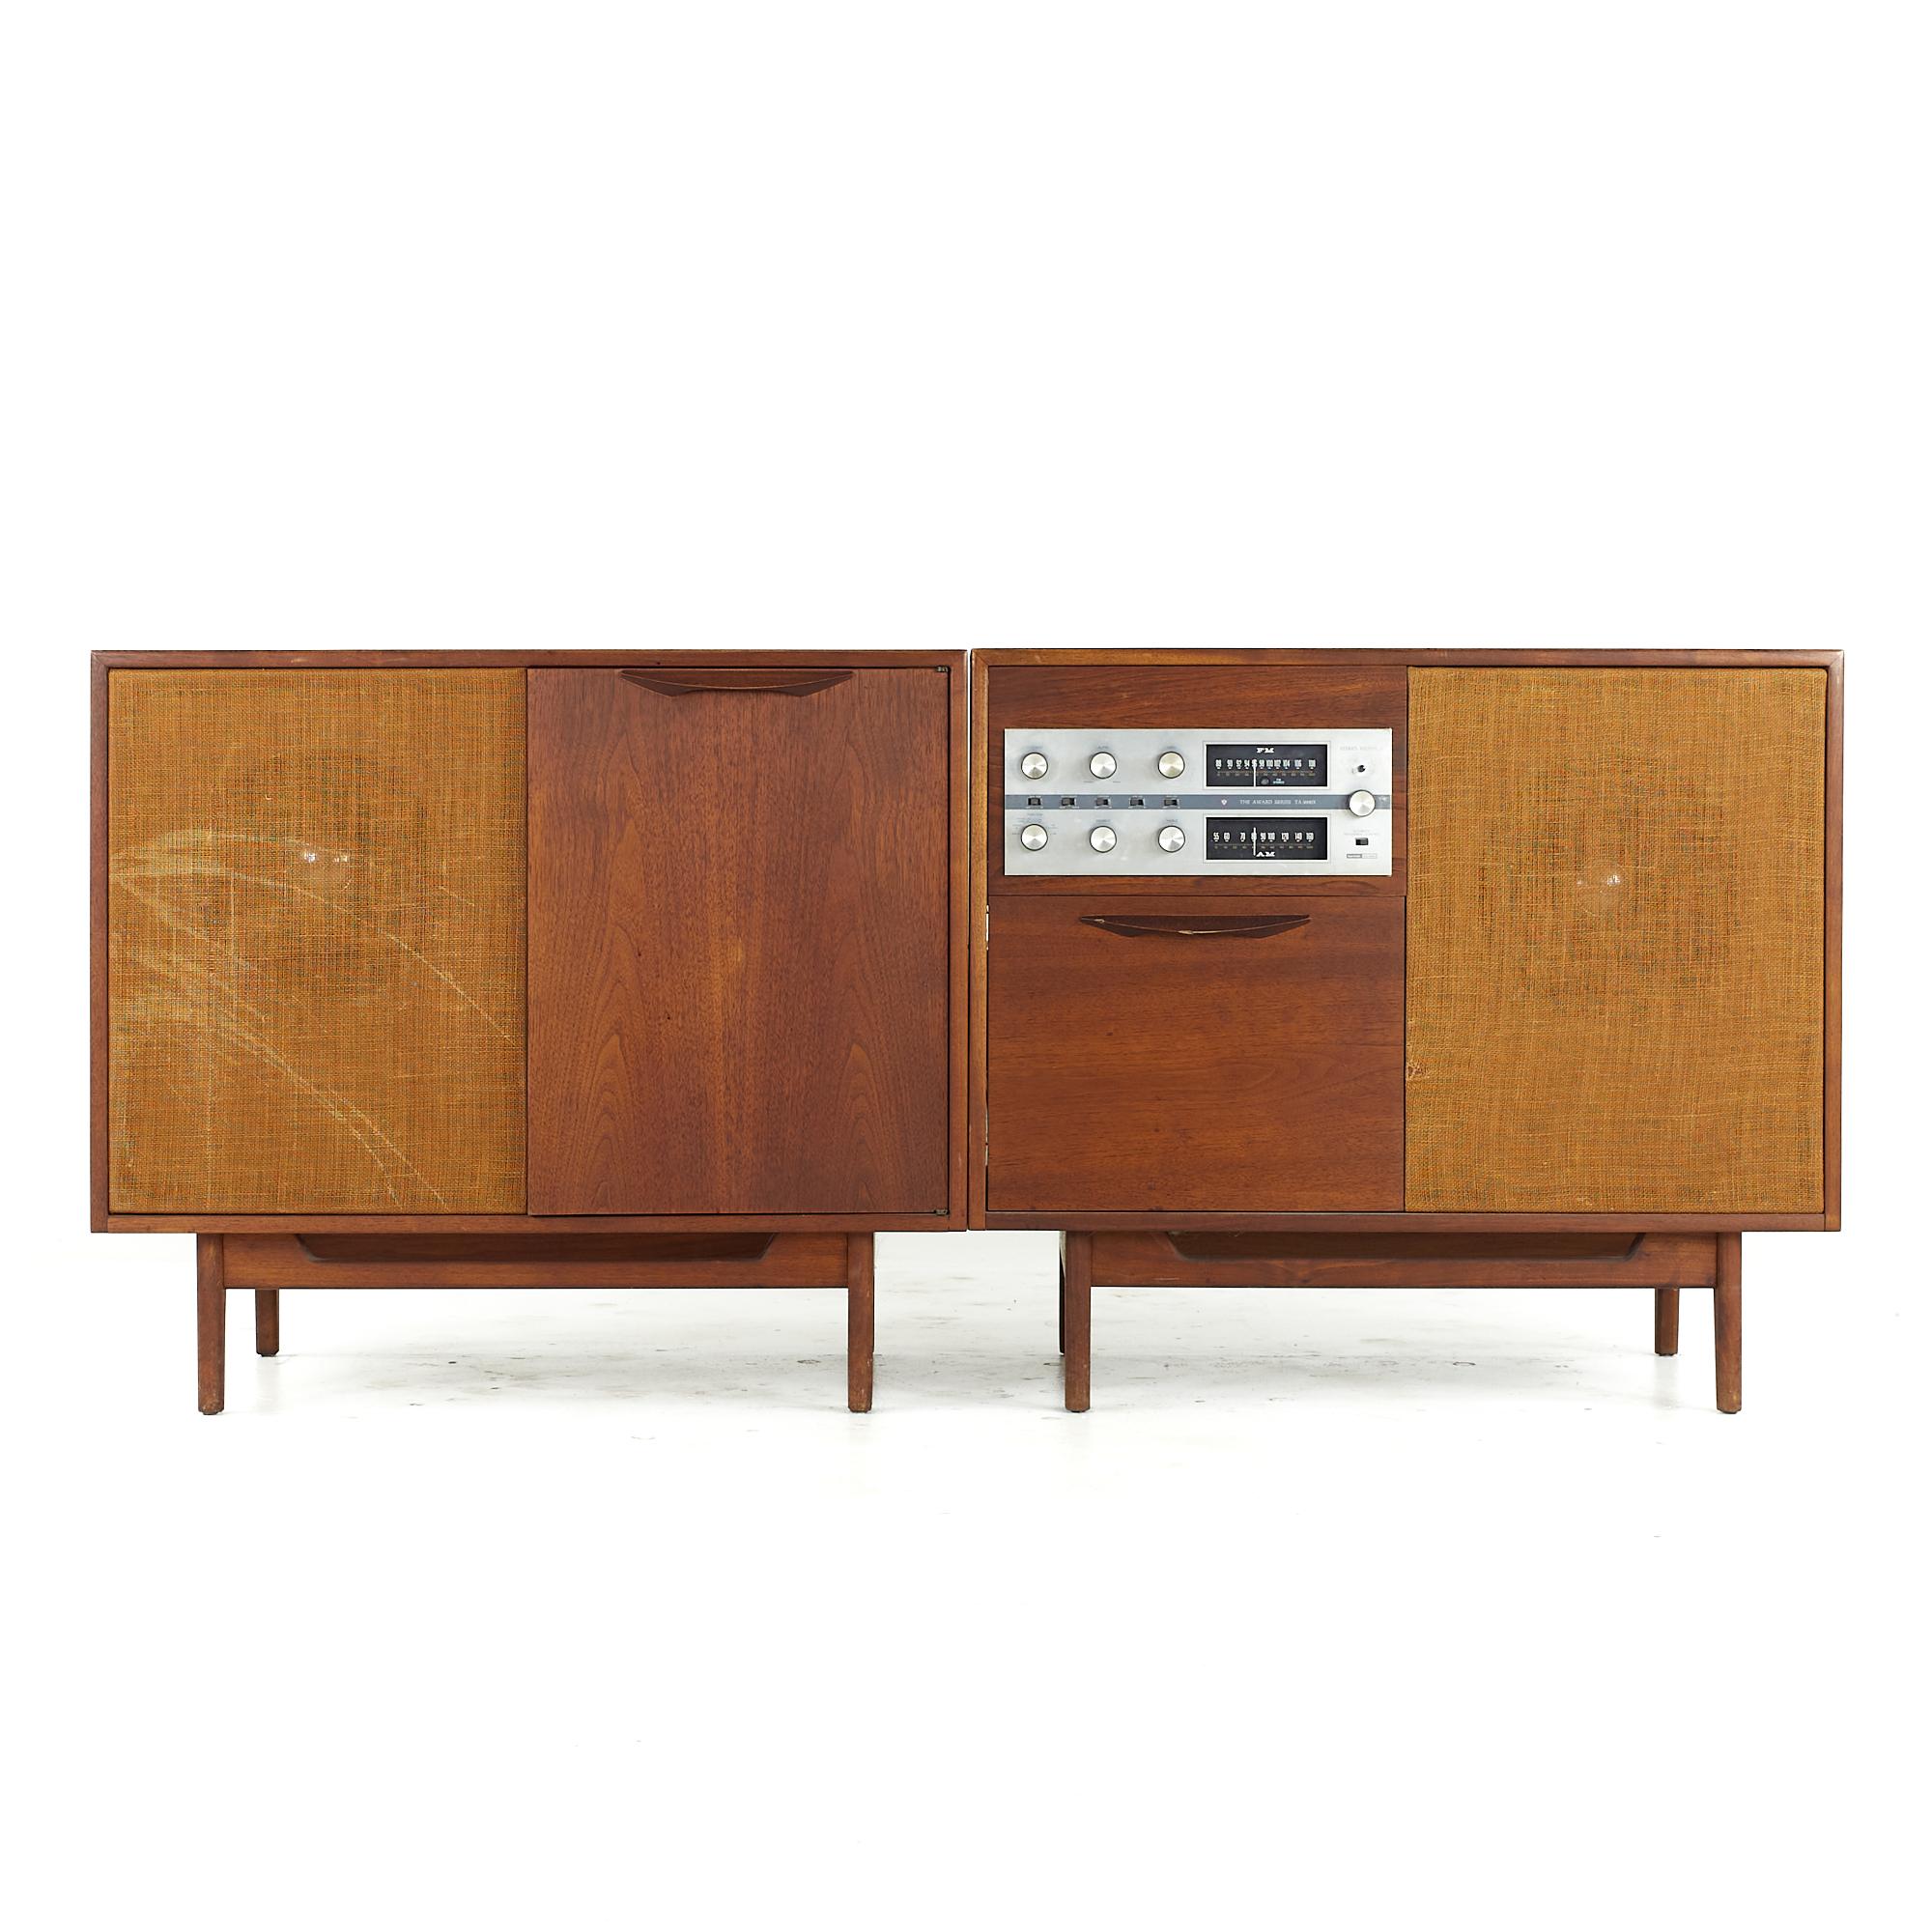 Jens Risom midcentury Walnut 2-Piece Stereo Console

This console measures: 72 wide (each side measures 36 inches wide) x 21 deep x 31.75 inches high

All pieces of furniture can be had in what we call restored vintage condition. That means the